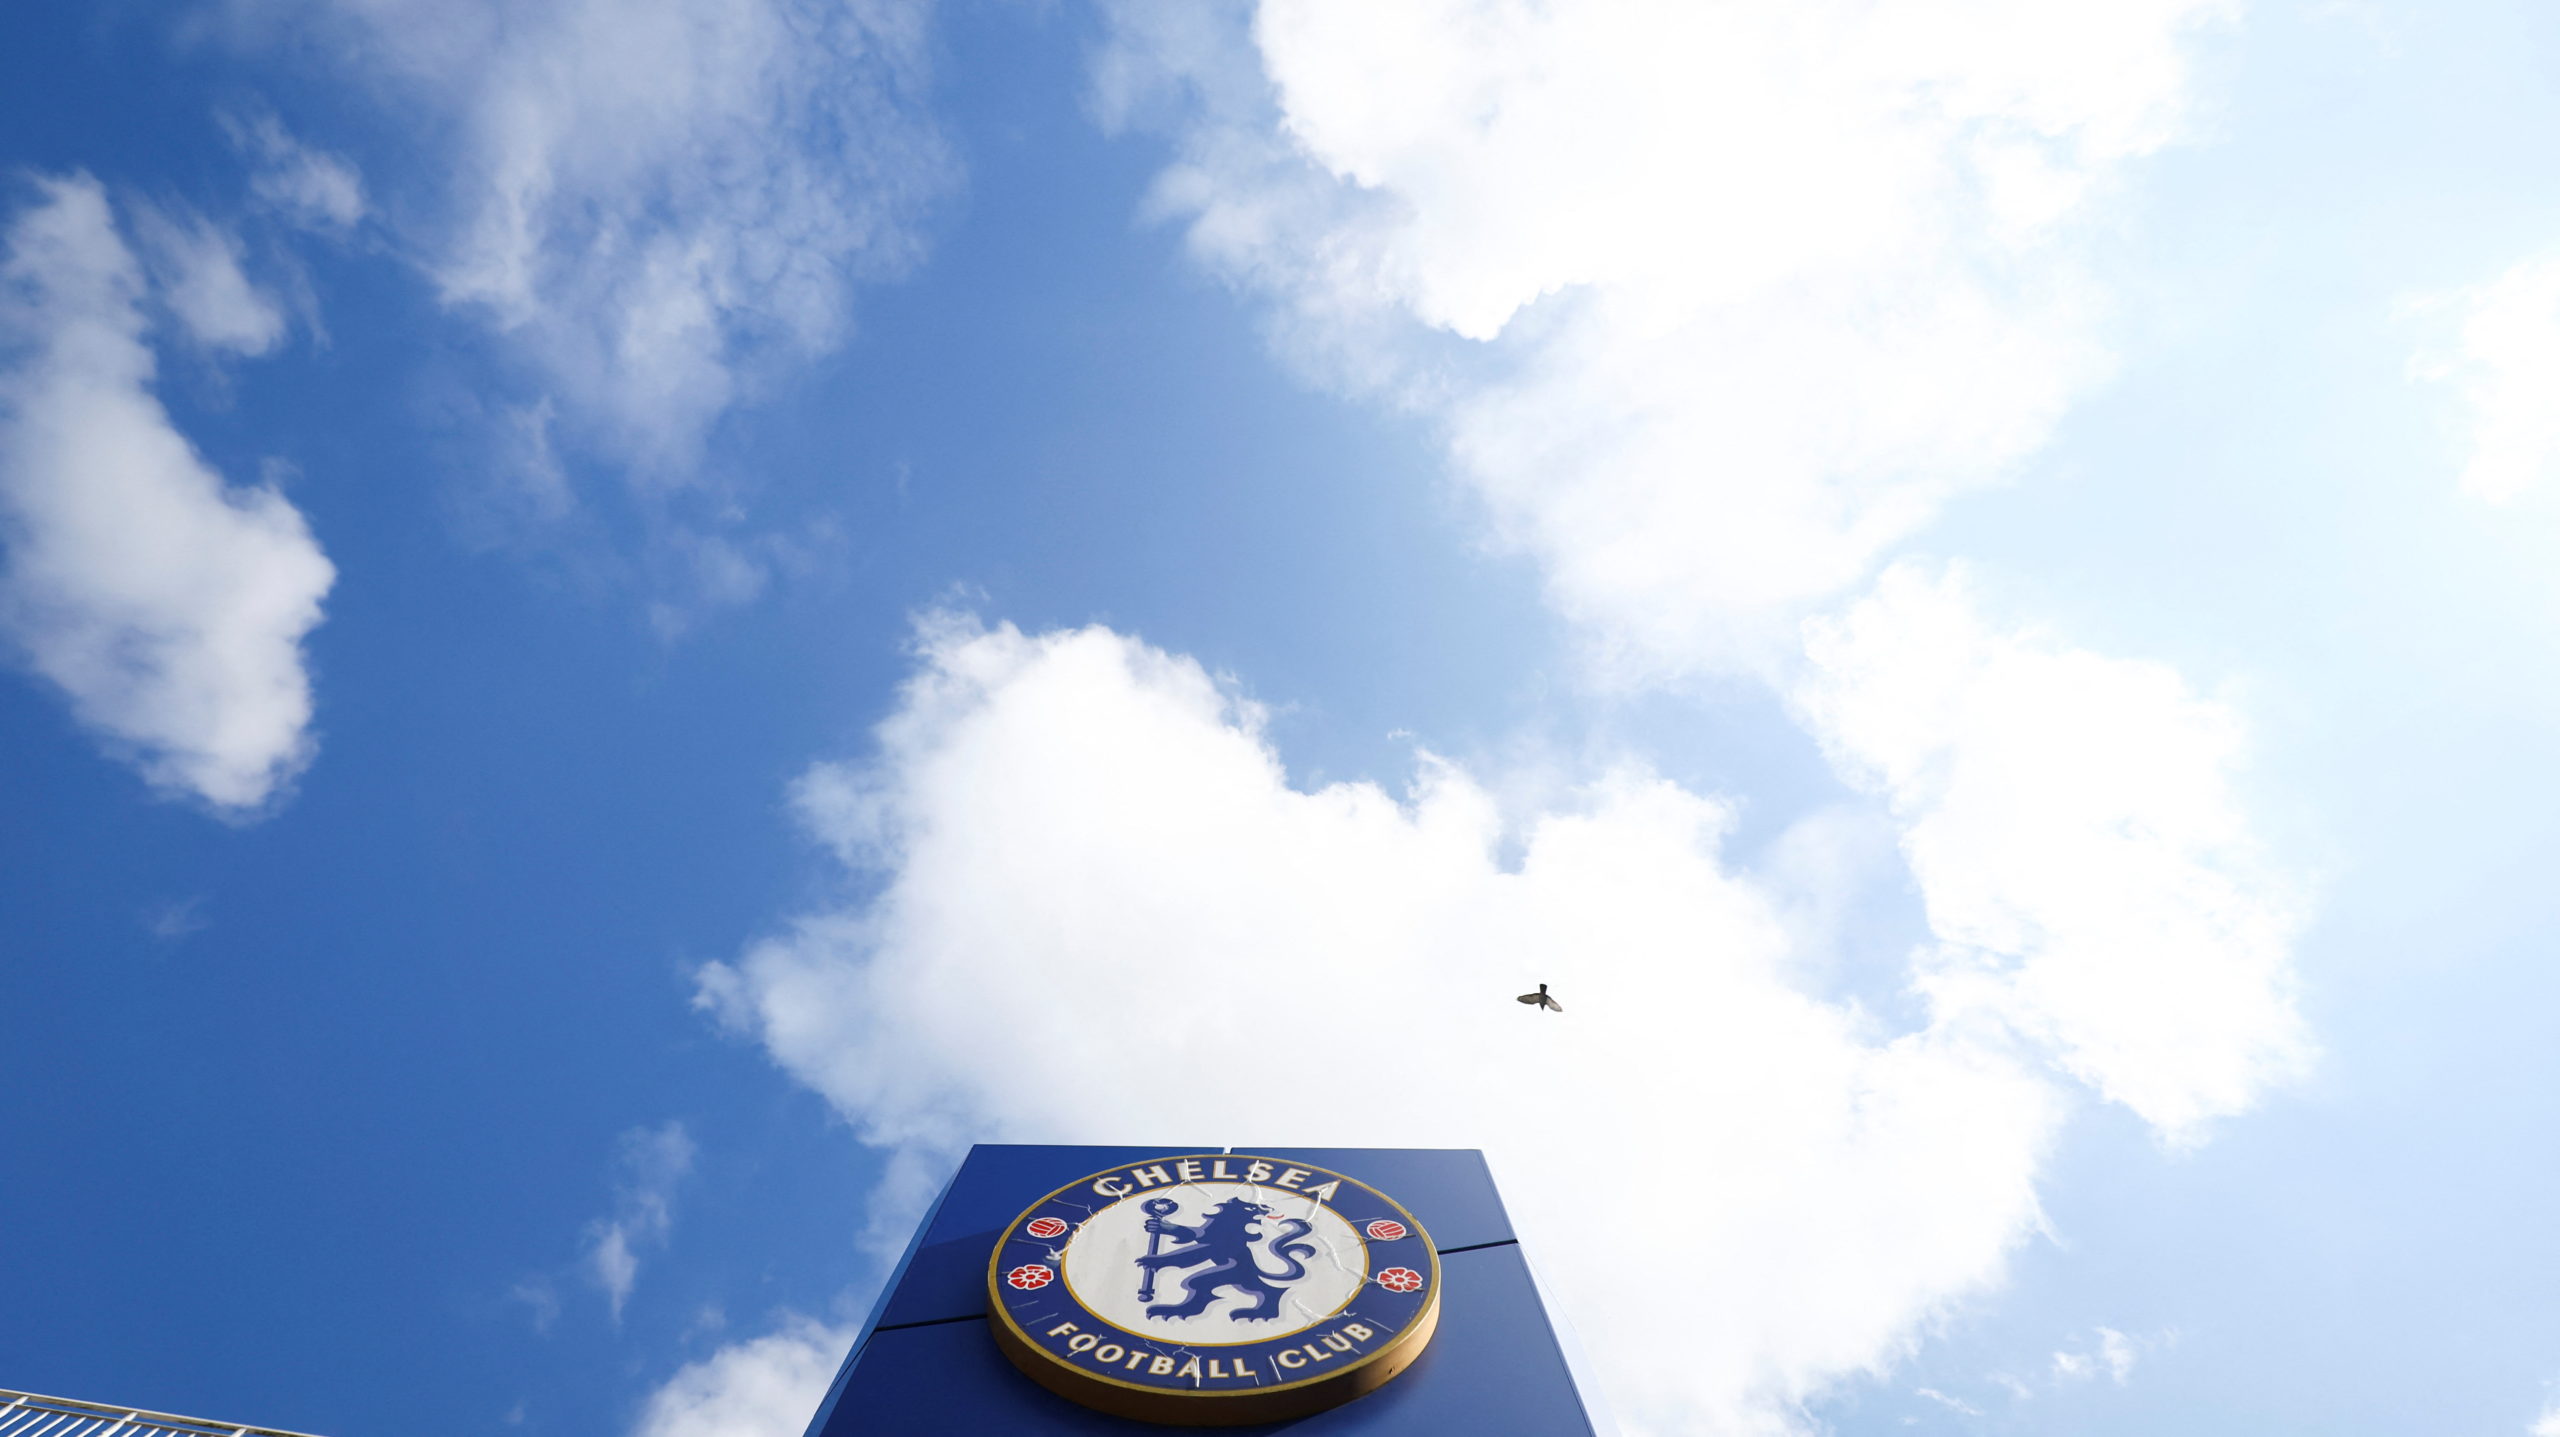 FILE PHOTO: The logo of Chelsea Football Club is pictured outside Stamford Bridge, the stadium for Chelsea Football Club, after Britain imposed sanctions on its Russian owner, Roman Abramovich, in London, Britain, March 10, 2022.